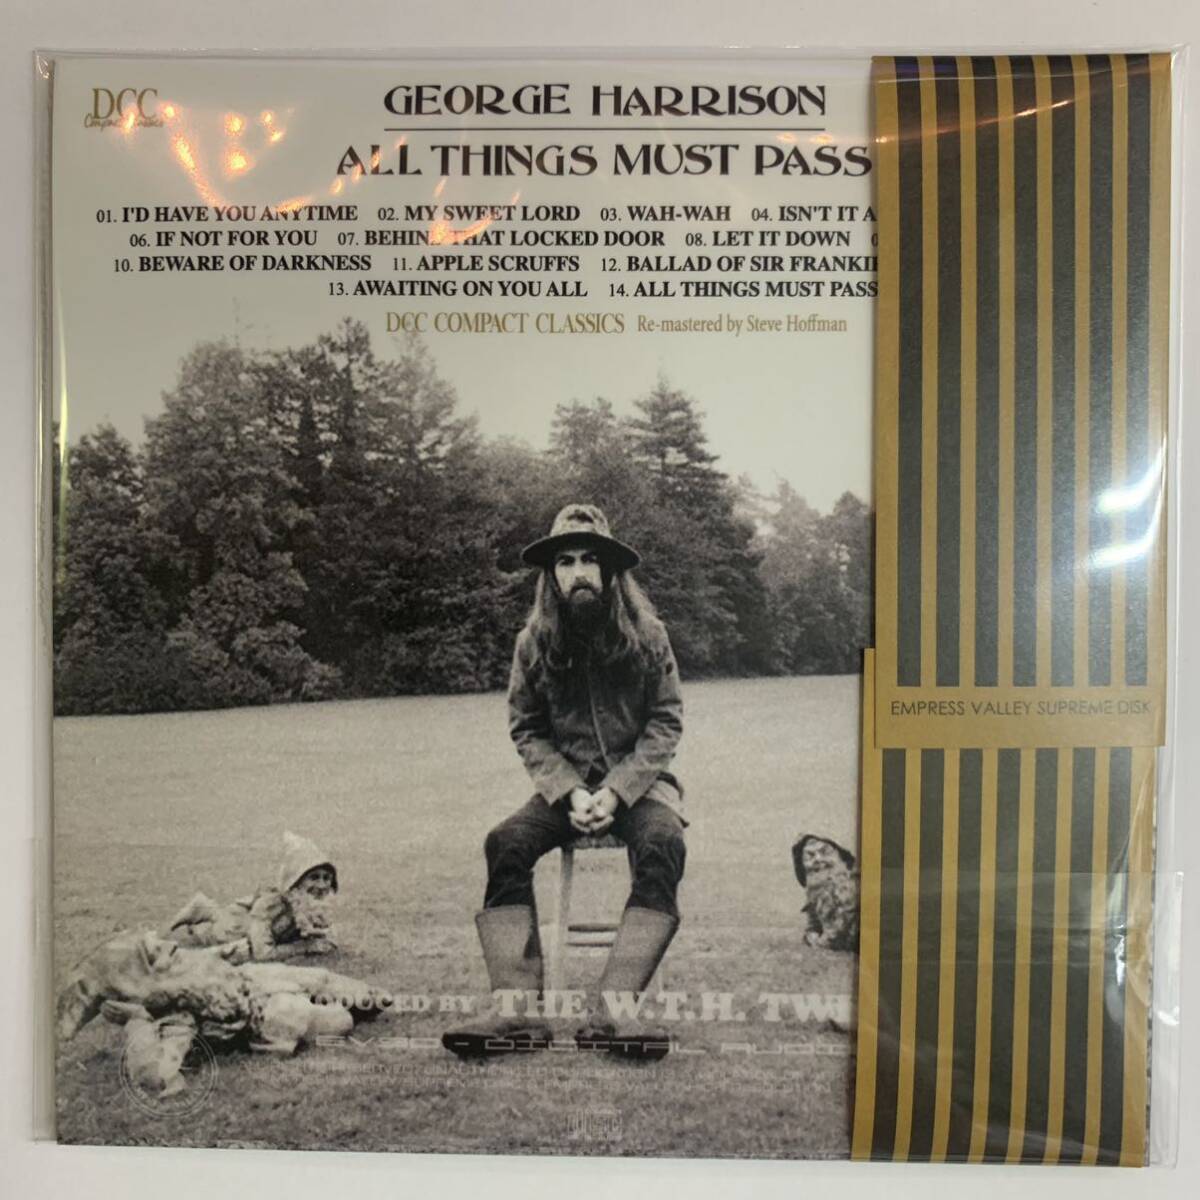 GEORGE HARRISON / ALL THINGS MUST PASS DCC COMPACT CLASSICS Remastered by Steve Hoffman (CD) 「帯付き紙ジャケット仕様限定盤」_画像4